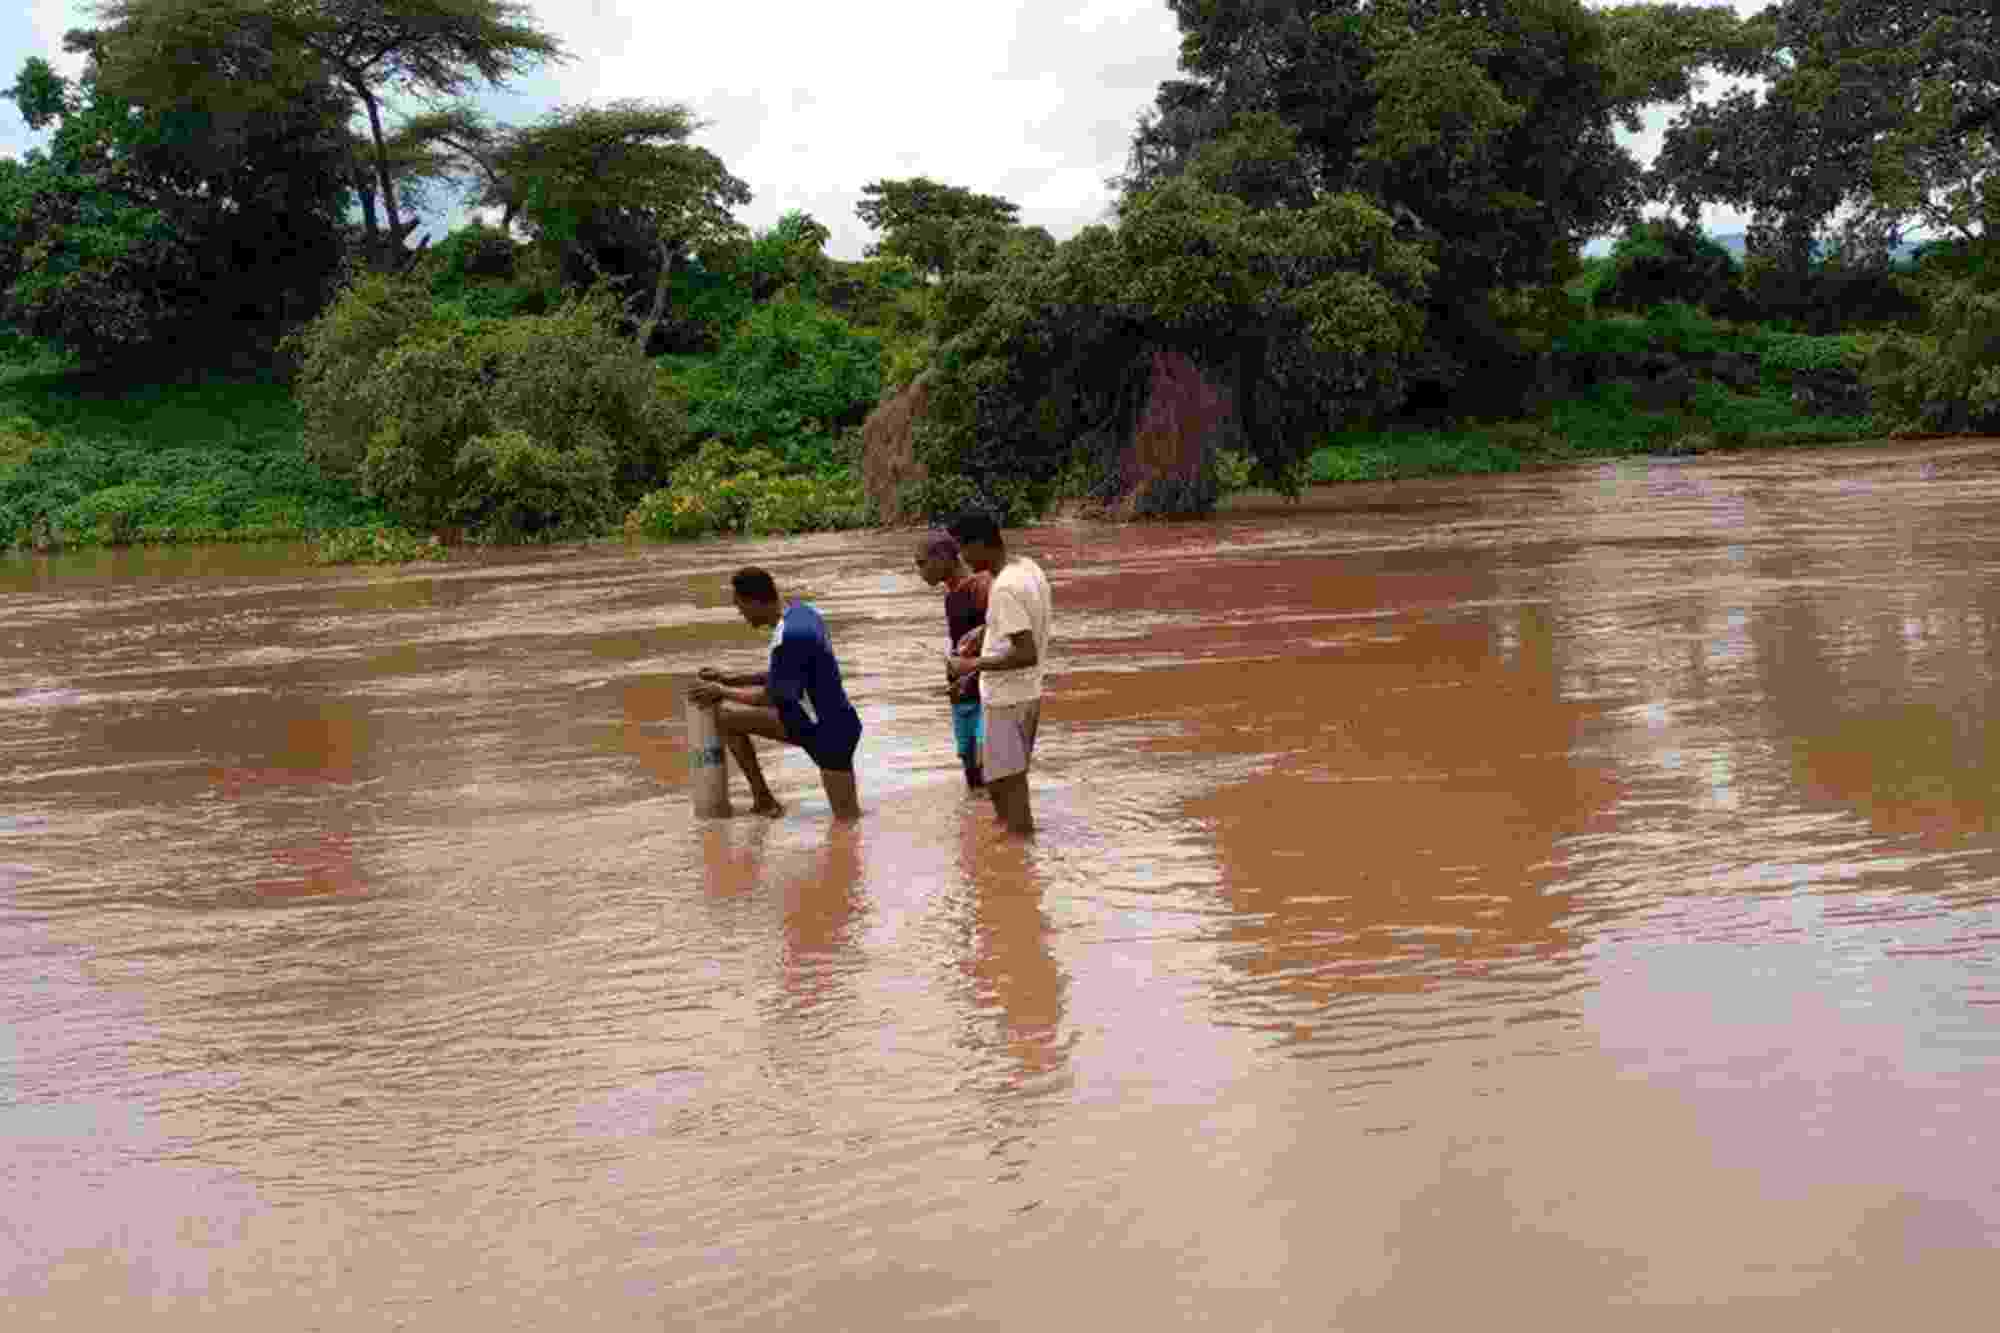 Three men stand knee-deep in brown coloured water as they inspect a water monitoring station, with lush greenery lining the bank behind them